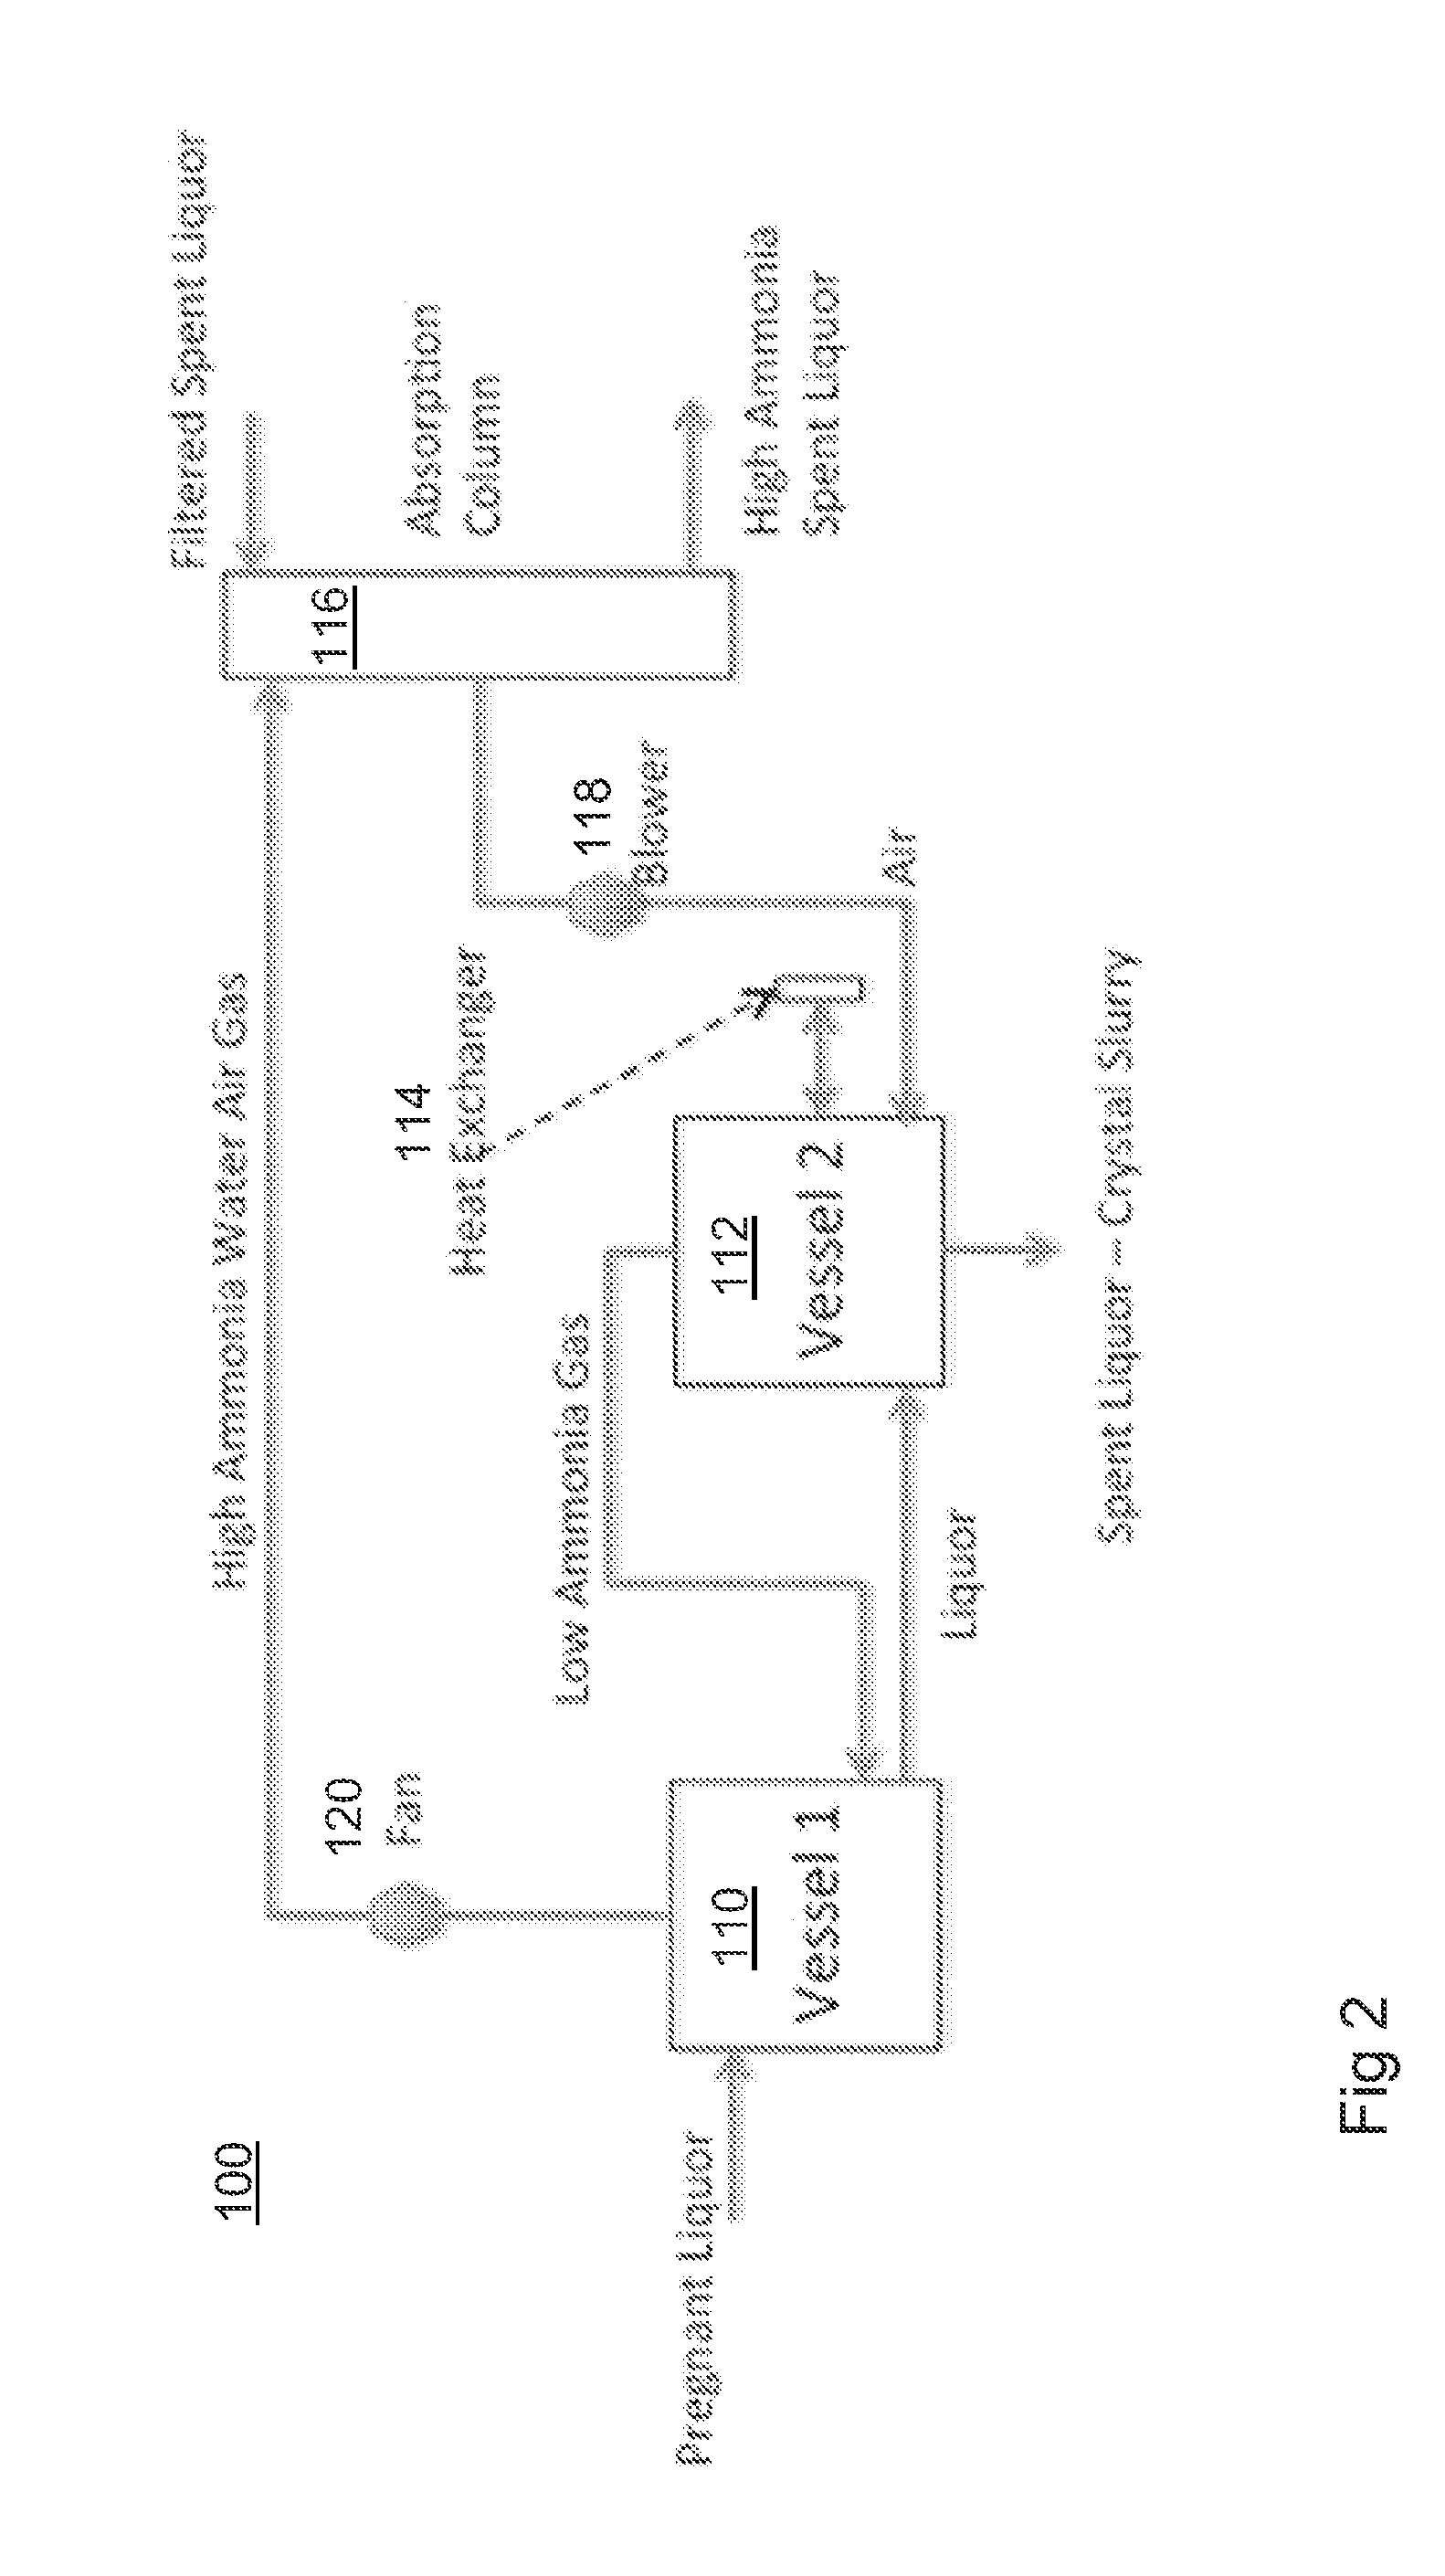 Process for recovering zinc and/or zinc oxide ii